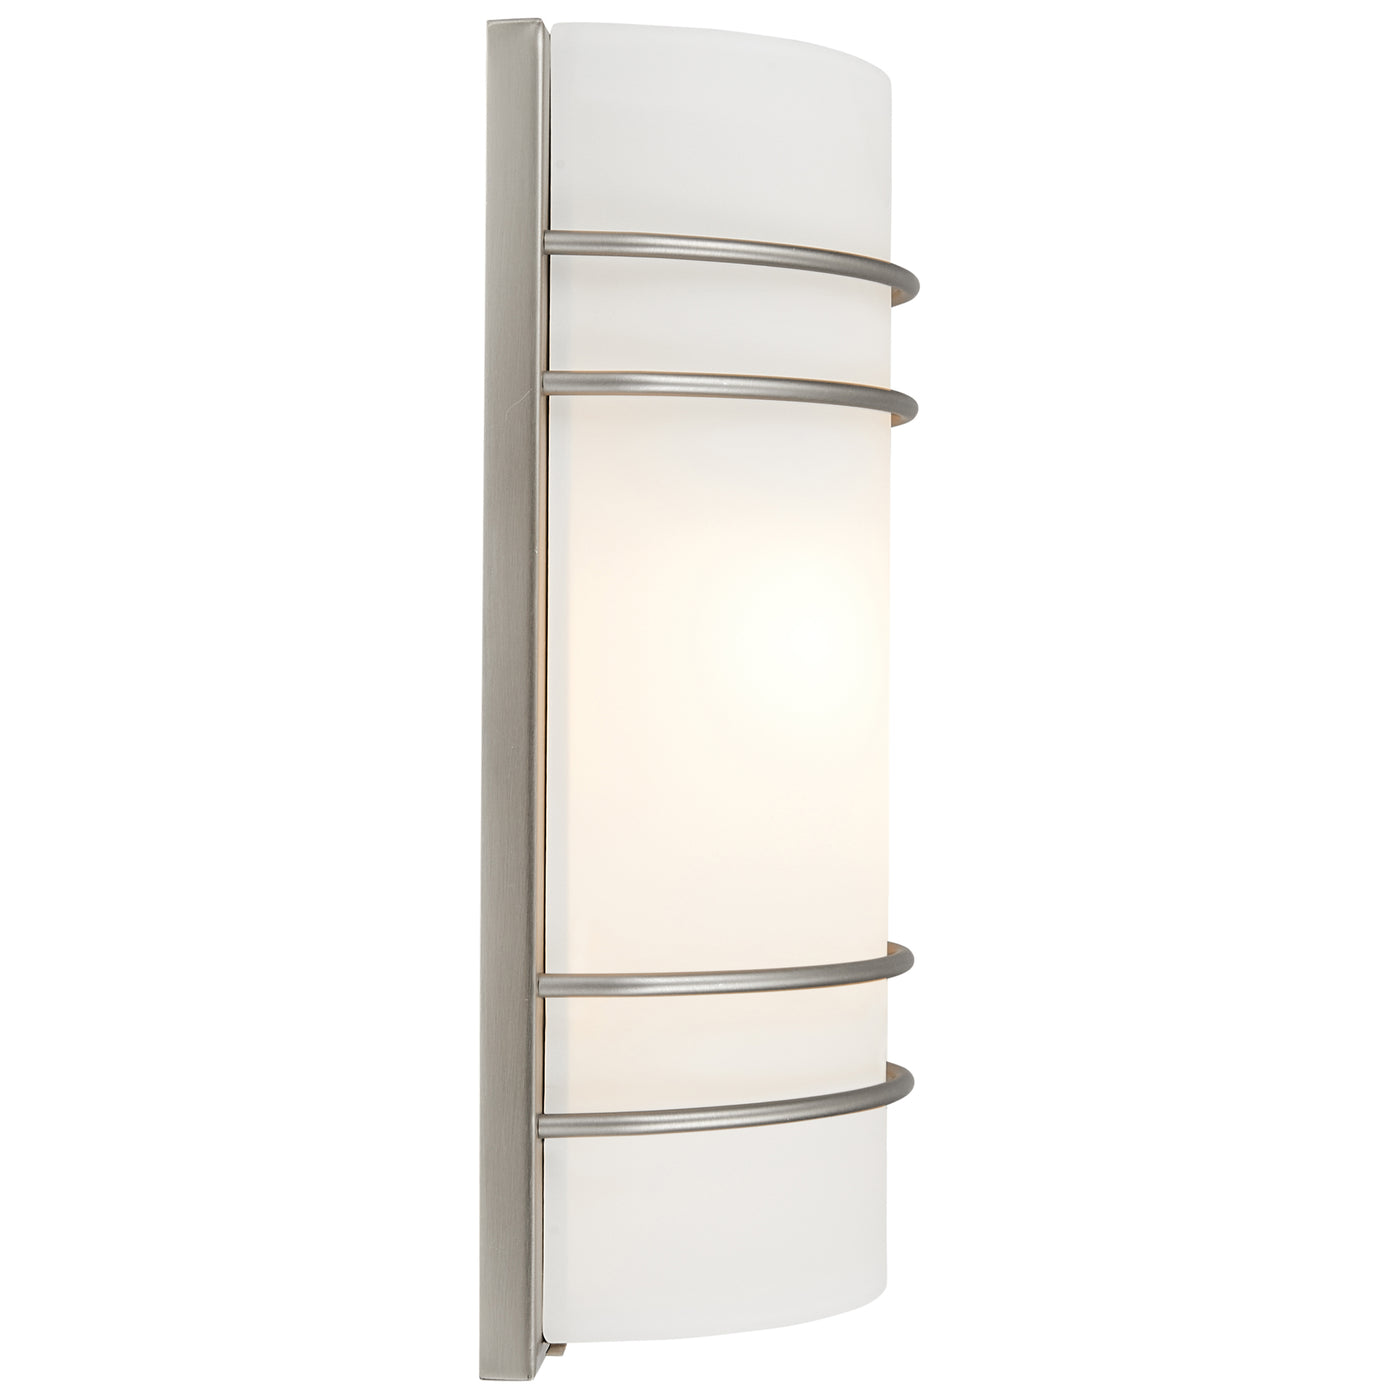 2 Light Wall Sconce, 120W, 120V, Brushed Steel Finish, Cassi Collection